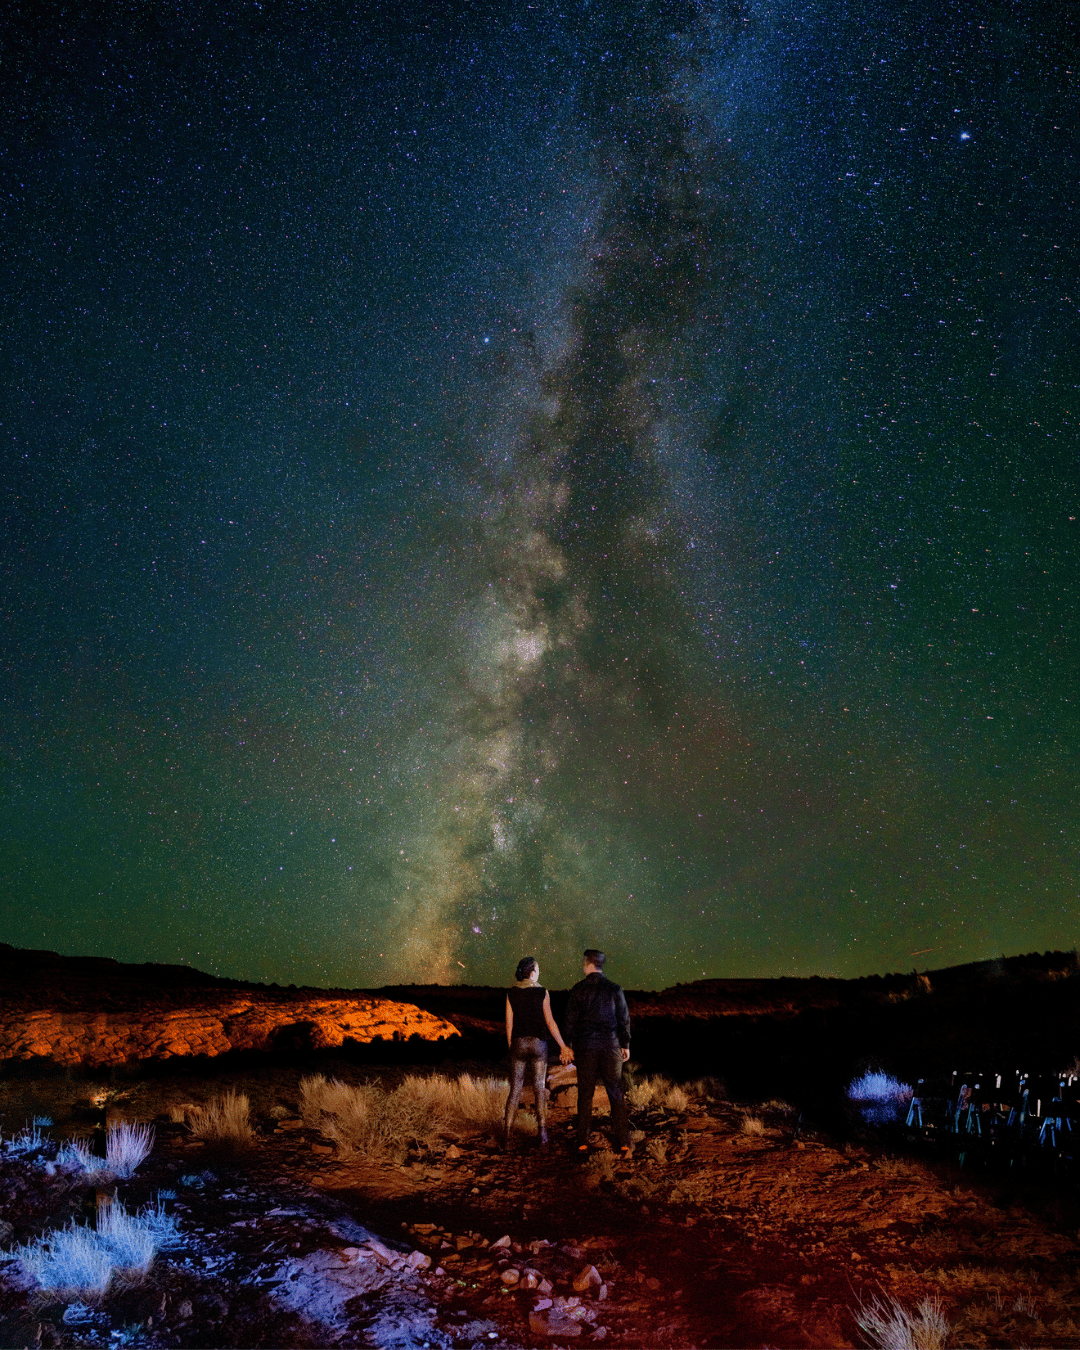 epic Milkyway shot with the couple at night